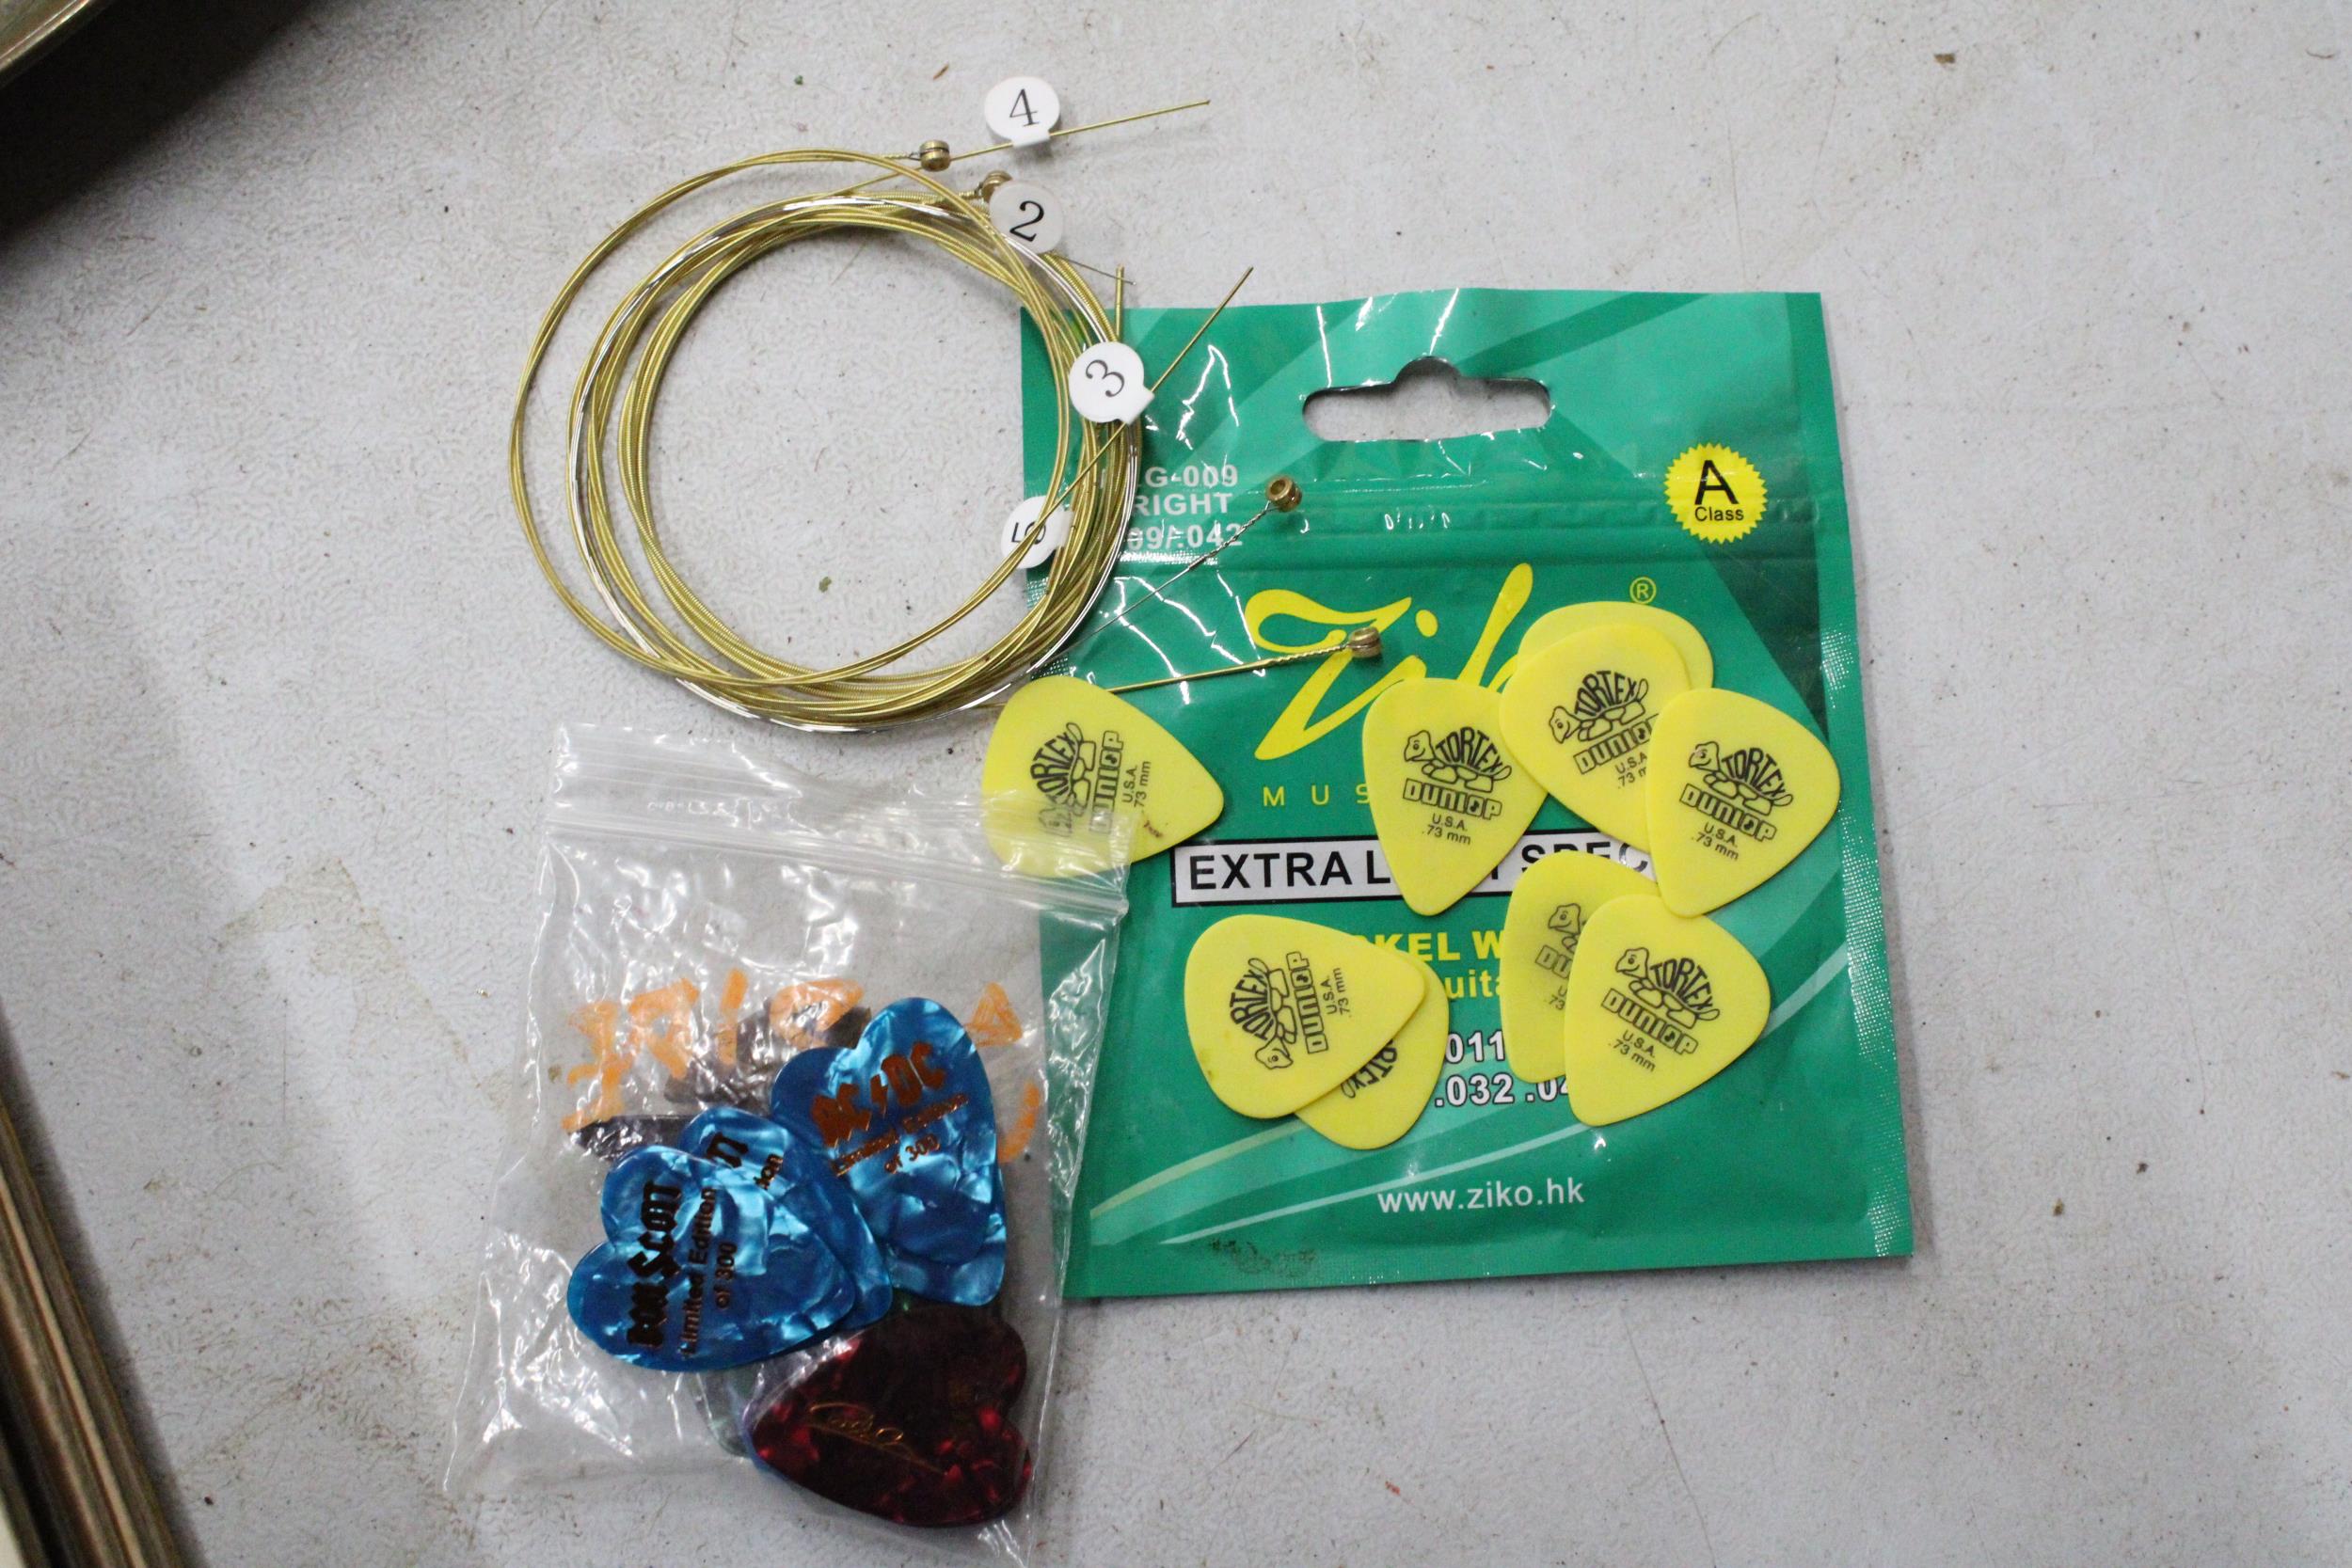 A QUANTITY OF ELECTRIC GUITAR STRINGS AND PLECTRUMS